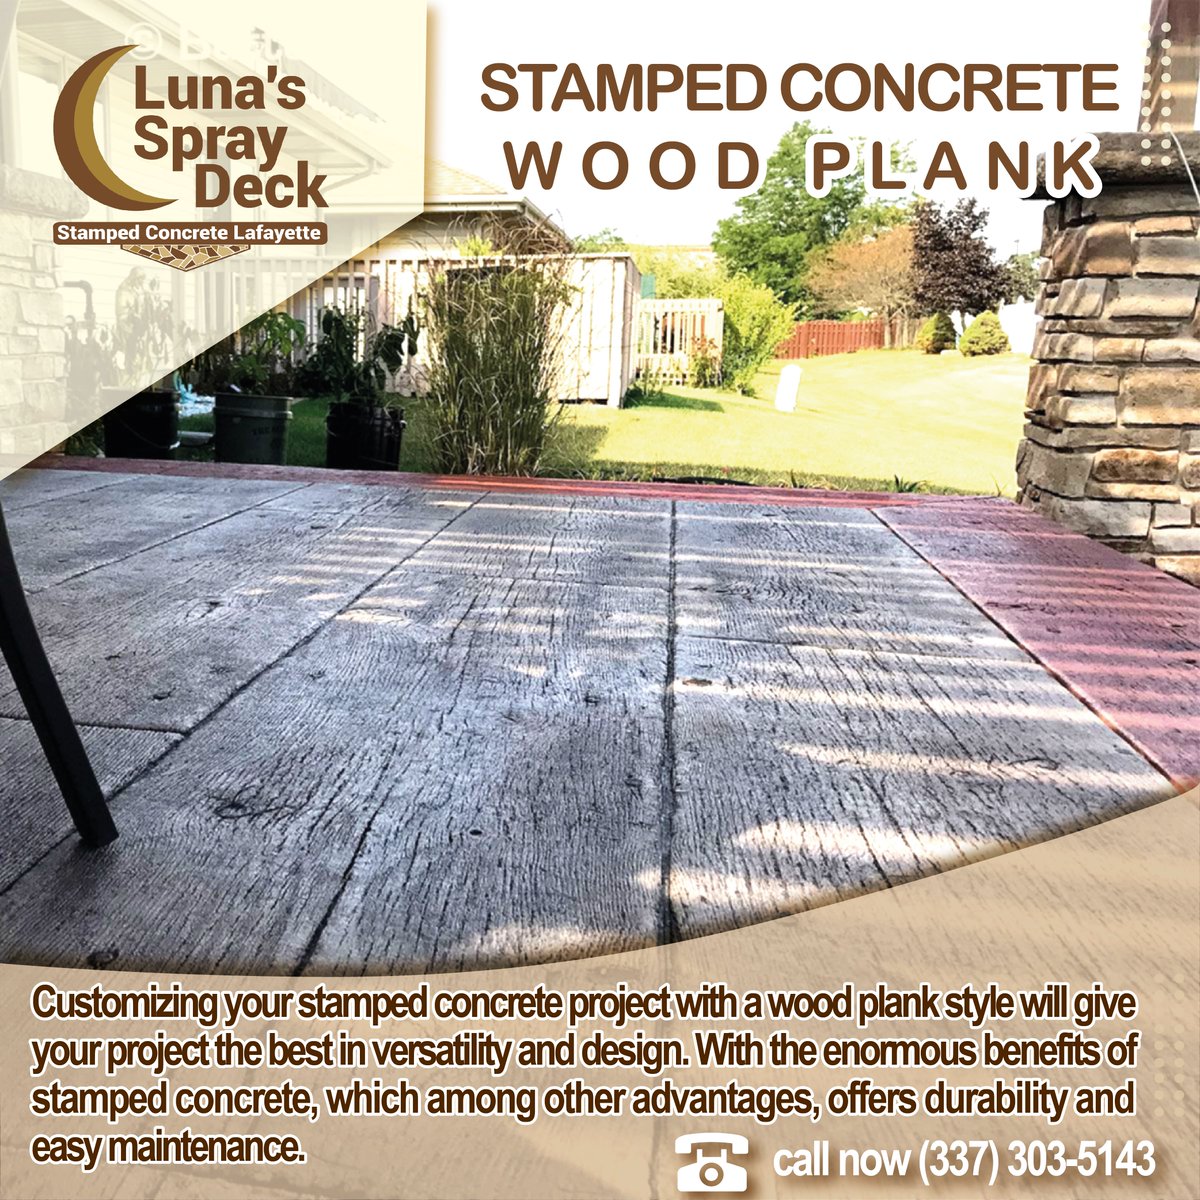 🌿🔨 Embrace Rustic Charm with Stamped Concrete Wood Planks! Experience the beauty of wood with the durability of concrete. 
#StampedConcreteWood #RusticElegance 
Check out all the services that we got for you! 🌙🌙   
.
.
🌐 bit.ly/3raqZiw 
📞 (337) 303-5143